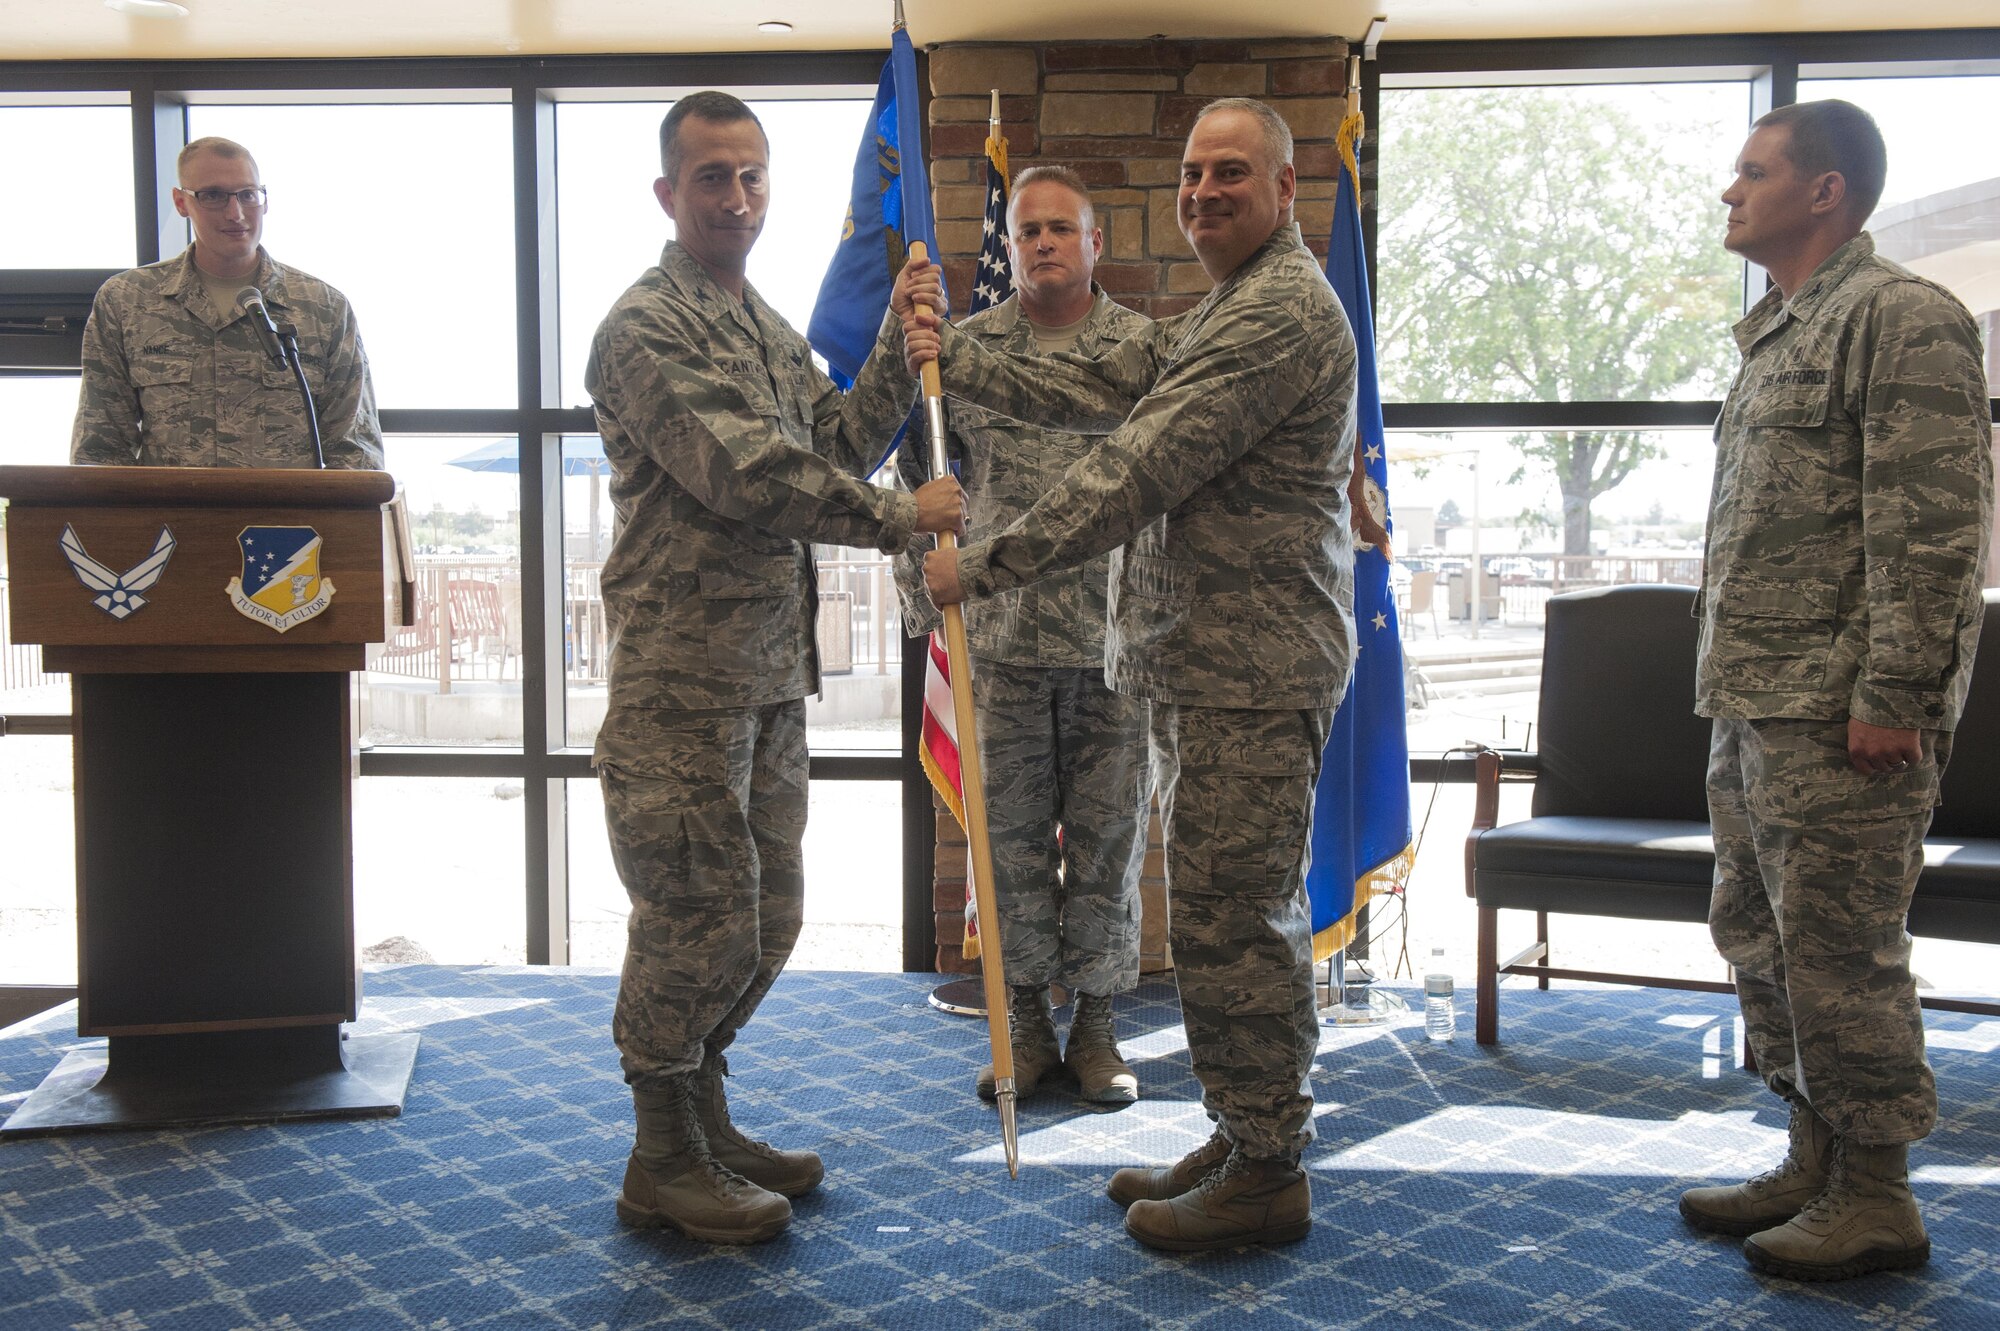 Col. Houston R. Cantwell, 49th Wing commander, takes the 49th Medical Group guidon from Col. Paul A. Willingham, 49th MDG outgoing commander, during a change of command ceremony at Club Holloman, June 23, 2017. During the ceremony, Willingham relinquished command of the 49th MDG to Col. Paul R. Brezinski. (U.S. Air Force photo by Airman 1st Class Ilyana A. Escalona)